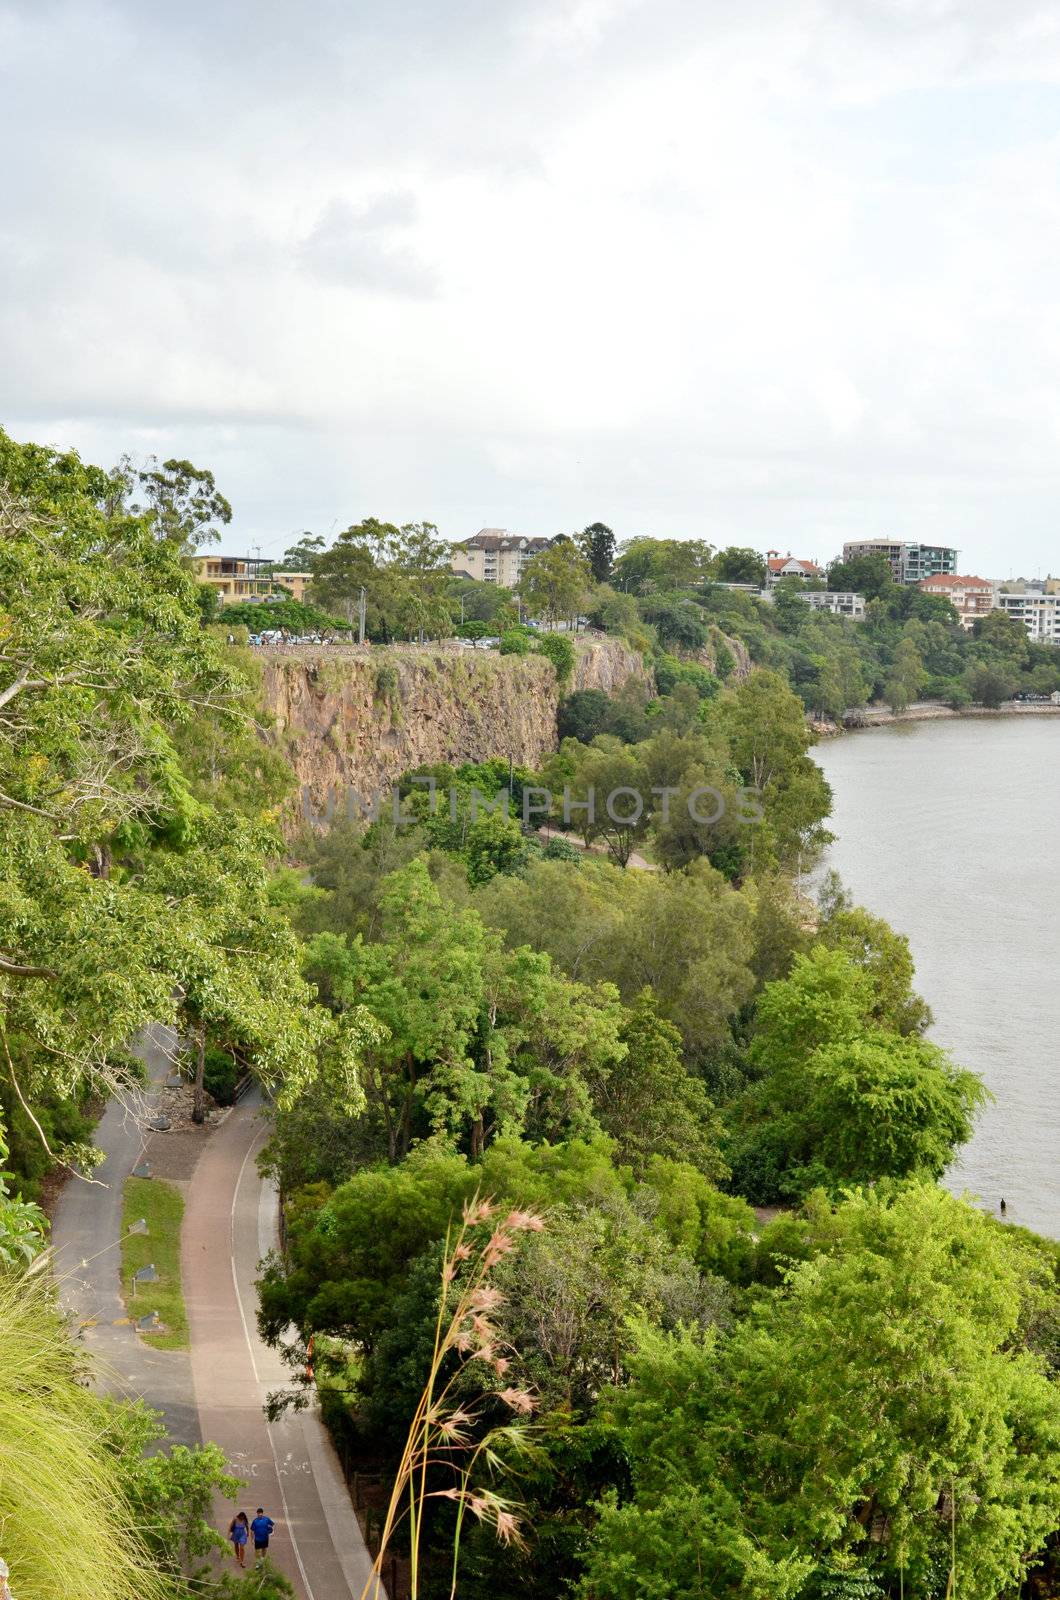 Riverside walkway on the southern bank of the Brisbane River. To the left is the Kangaroo Point cliffs. Photo taken from the top of the cliffs.